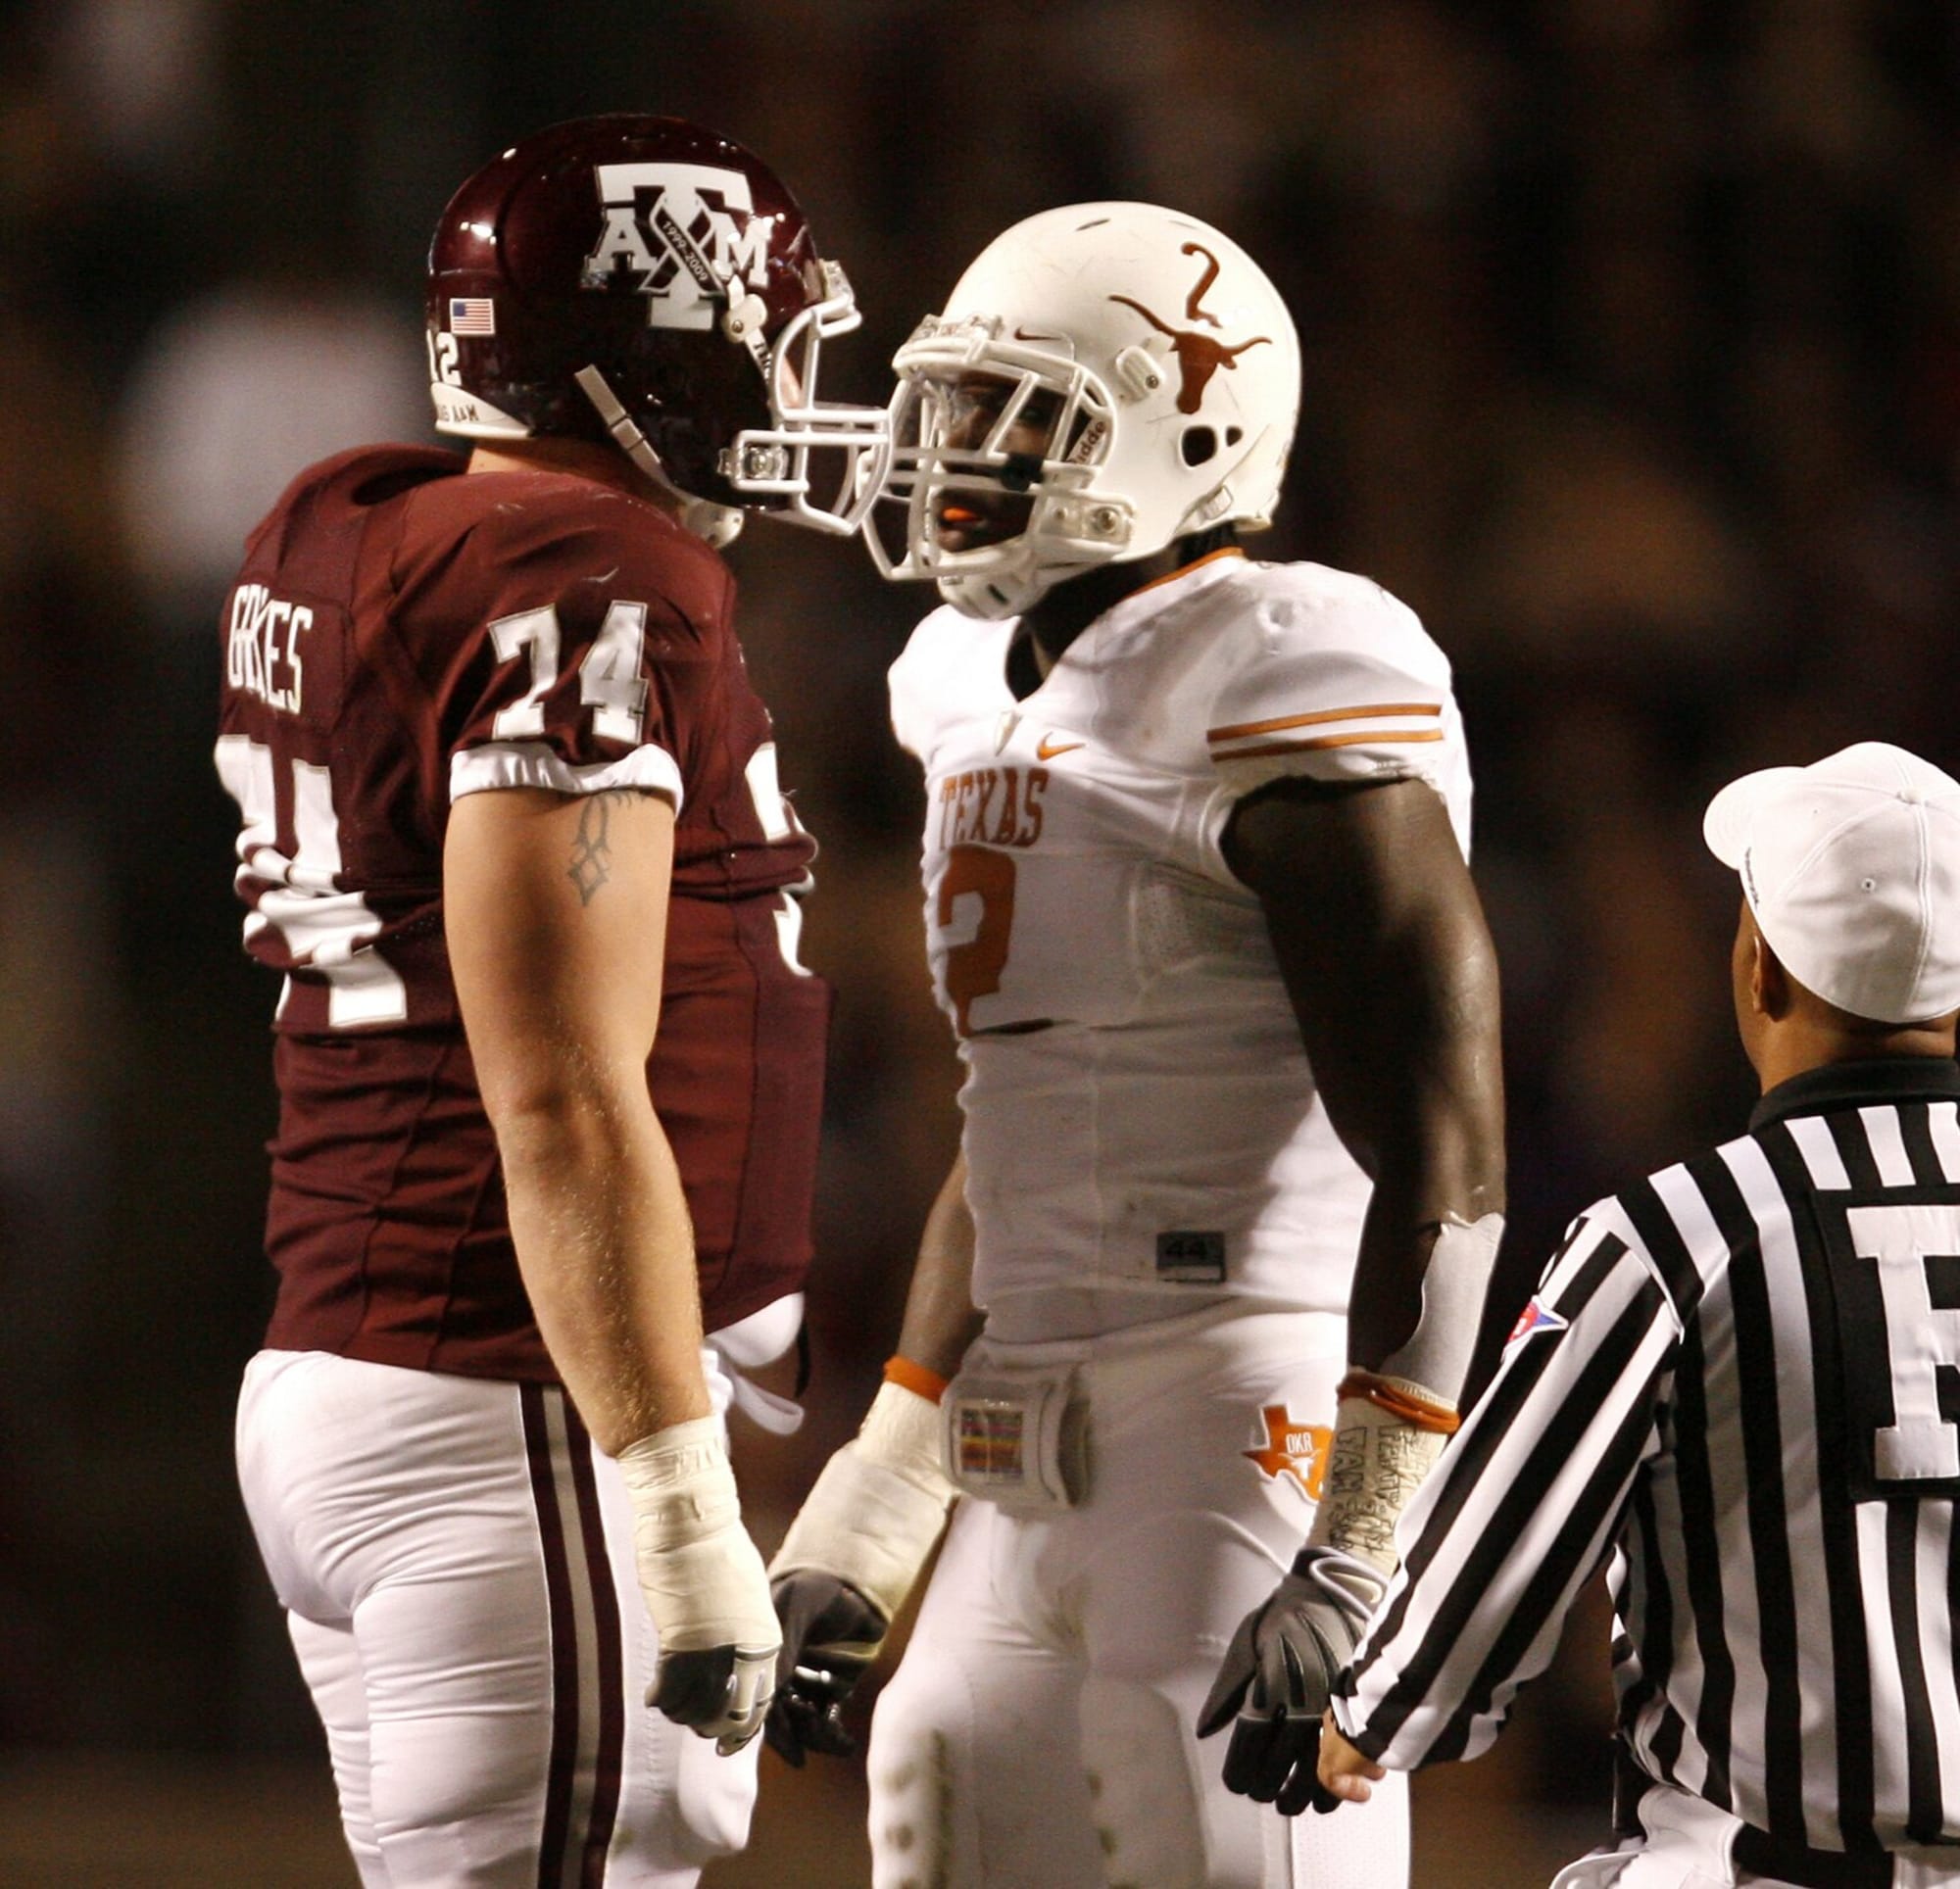 Texas vs. Texas A&M Football rivalry renewal would be great for CFB